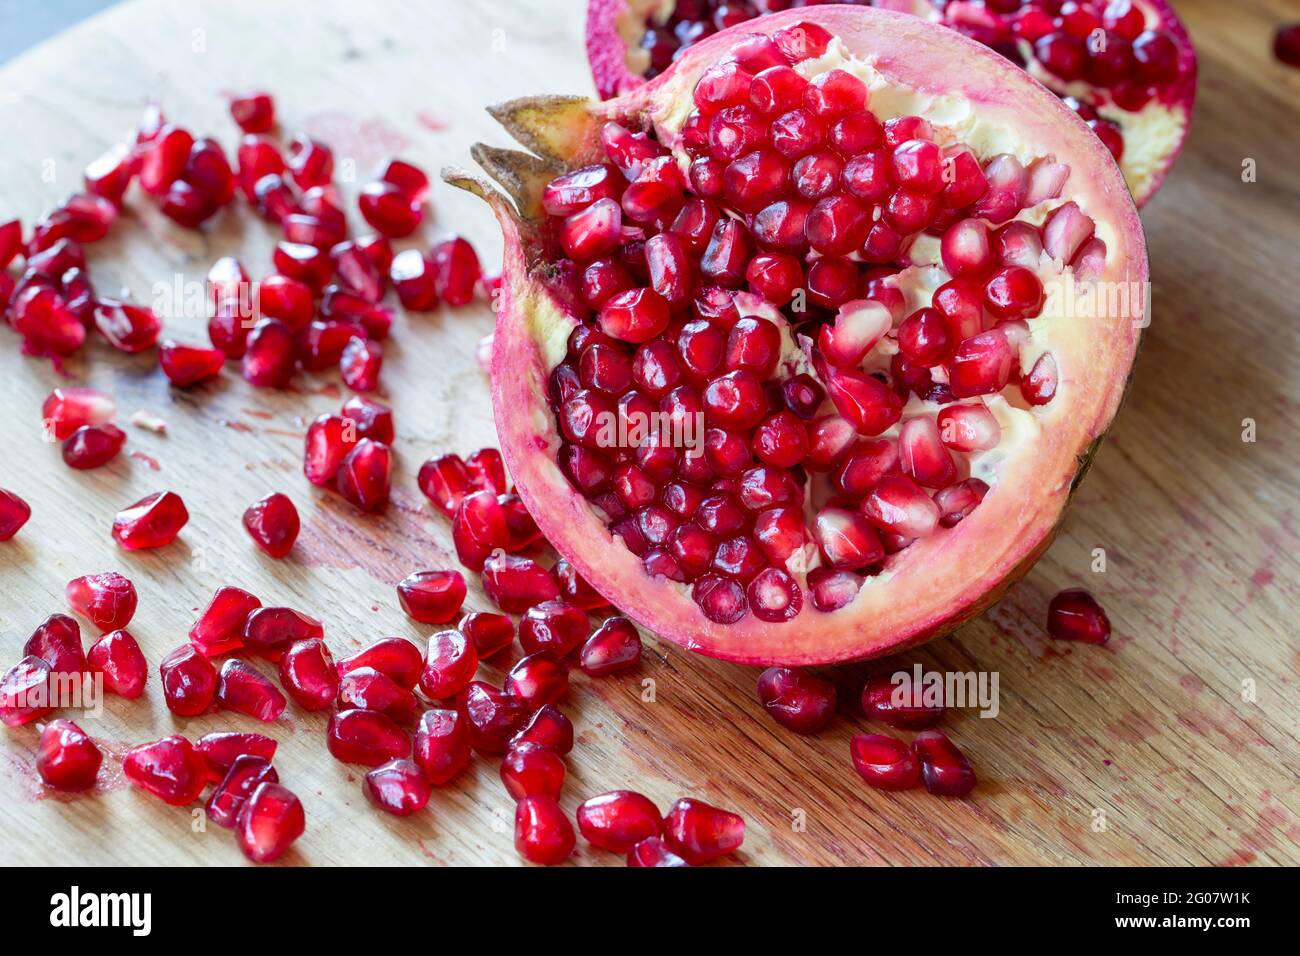 Ripe red pomegranate on wooden board and dark background Stock Photo